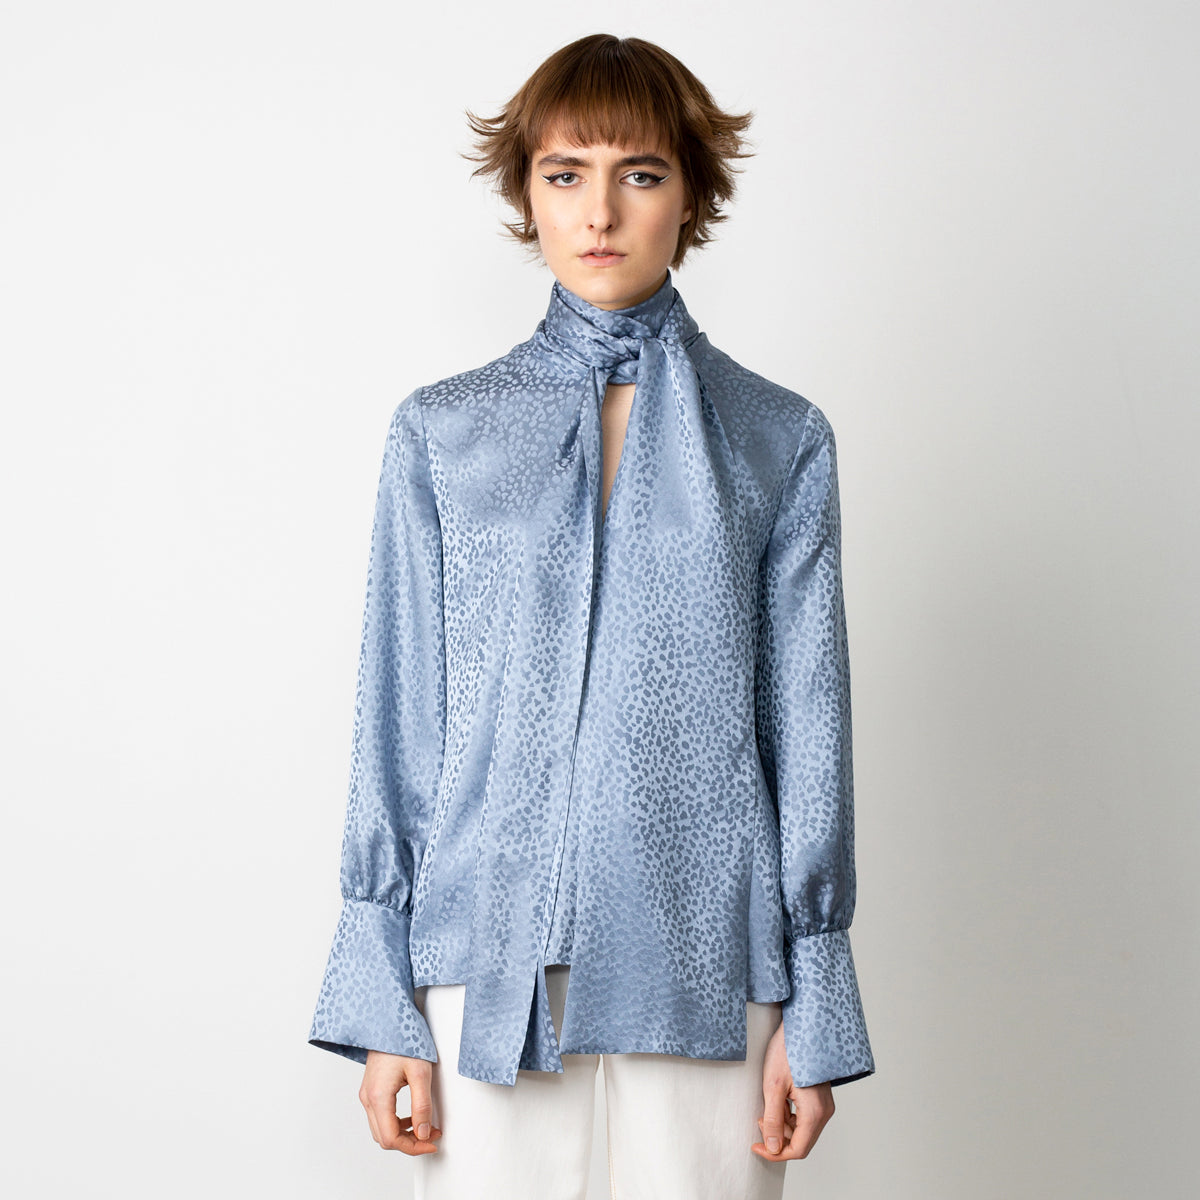 Bow Tie Blouse Grey-Blue